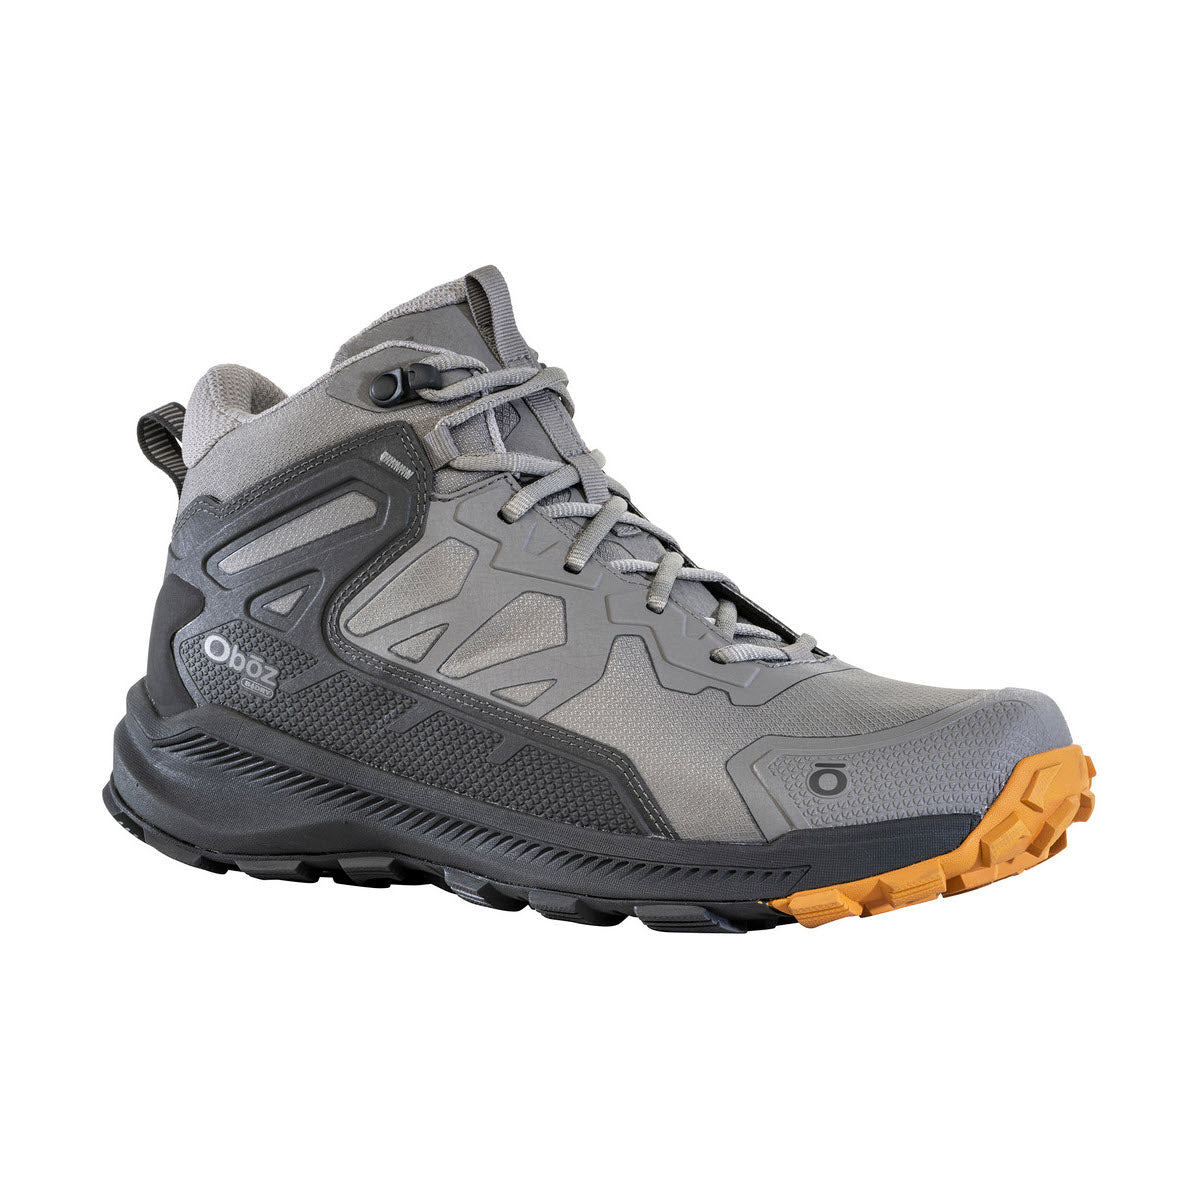 Sentence with Product Name and Brand Name: Oboz Katabatic Mid hiking boot with detailed stitching and orange accents on a white background.